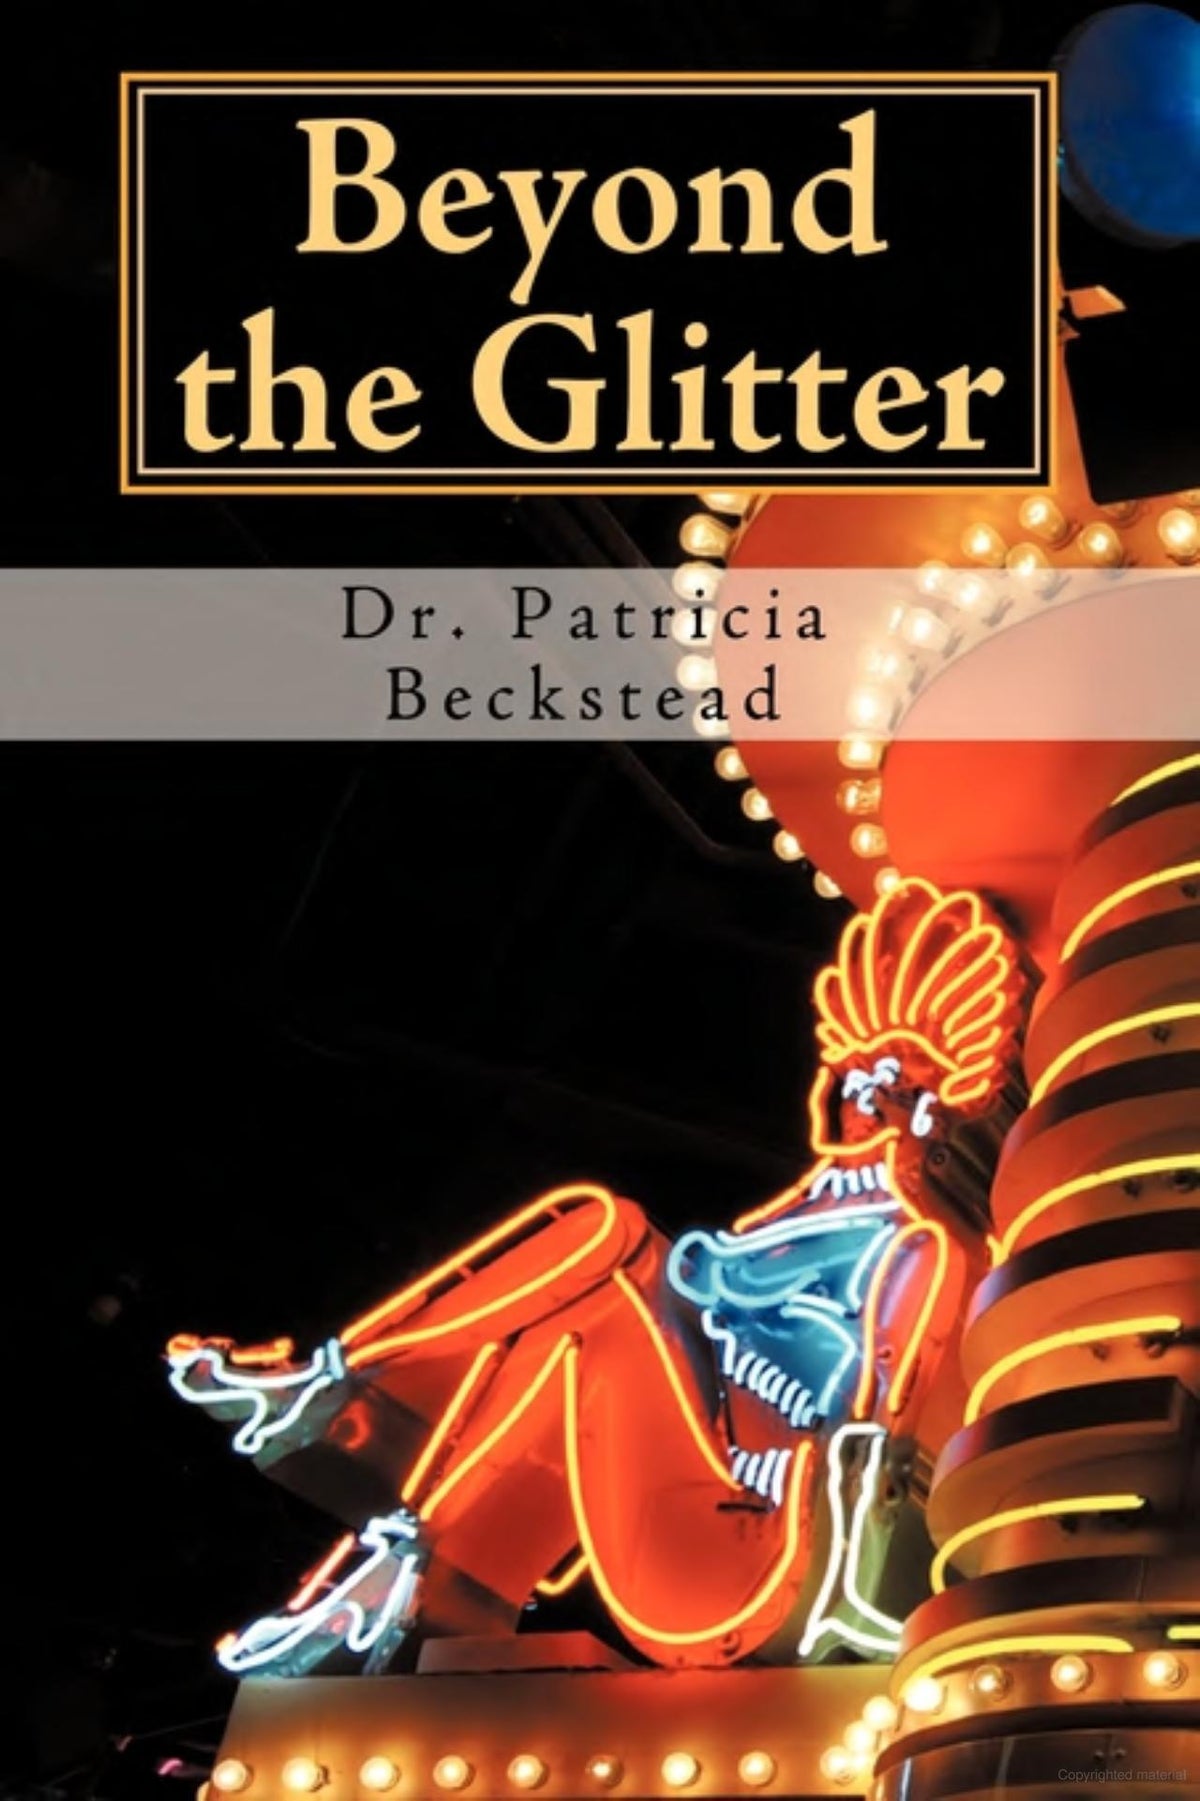 Beyond the Glitter by Patricia Beckstead